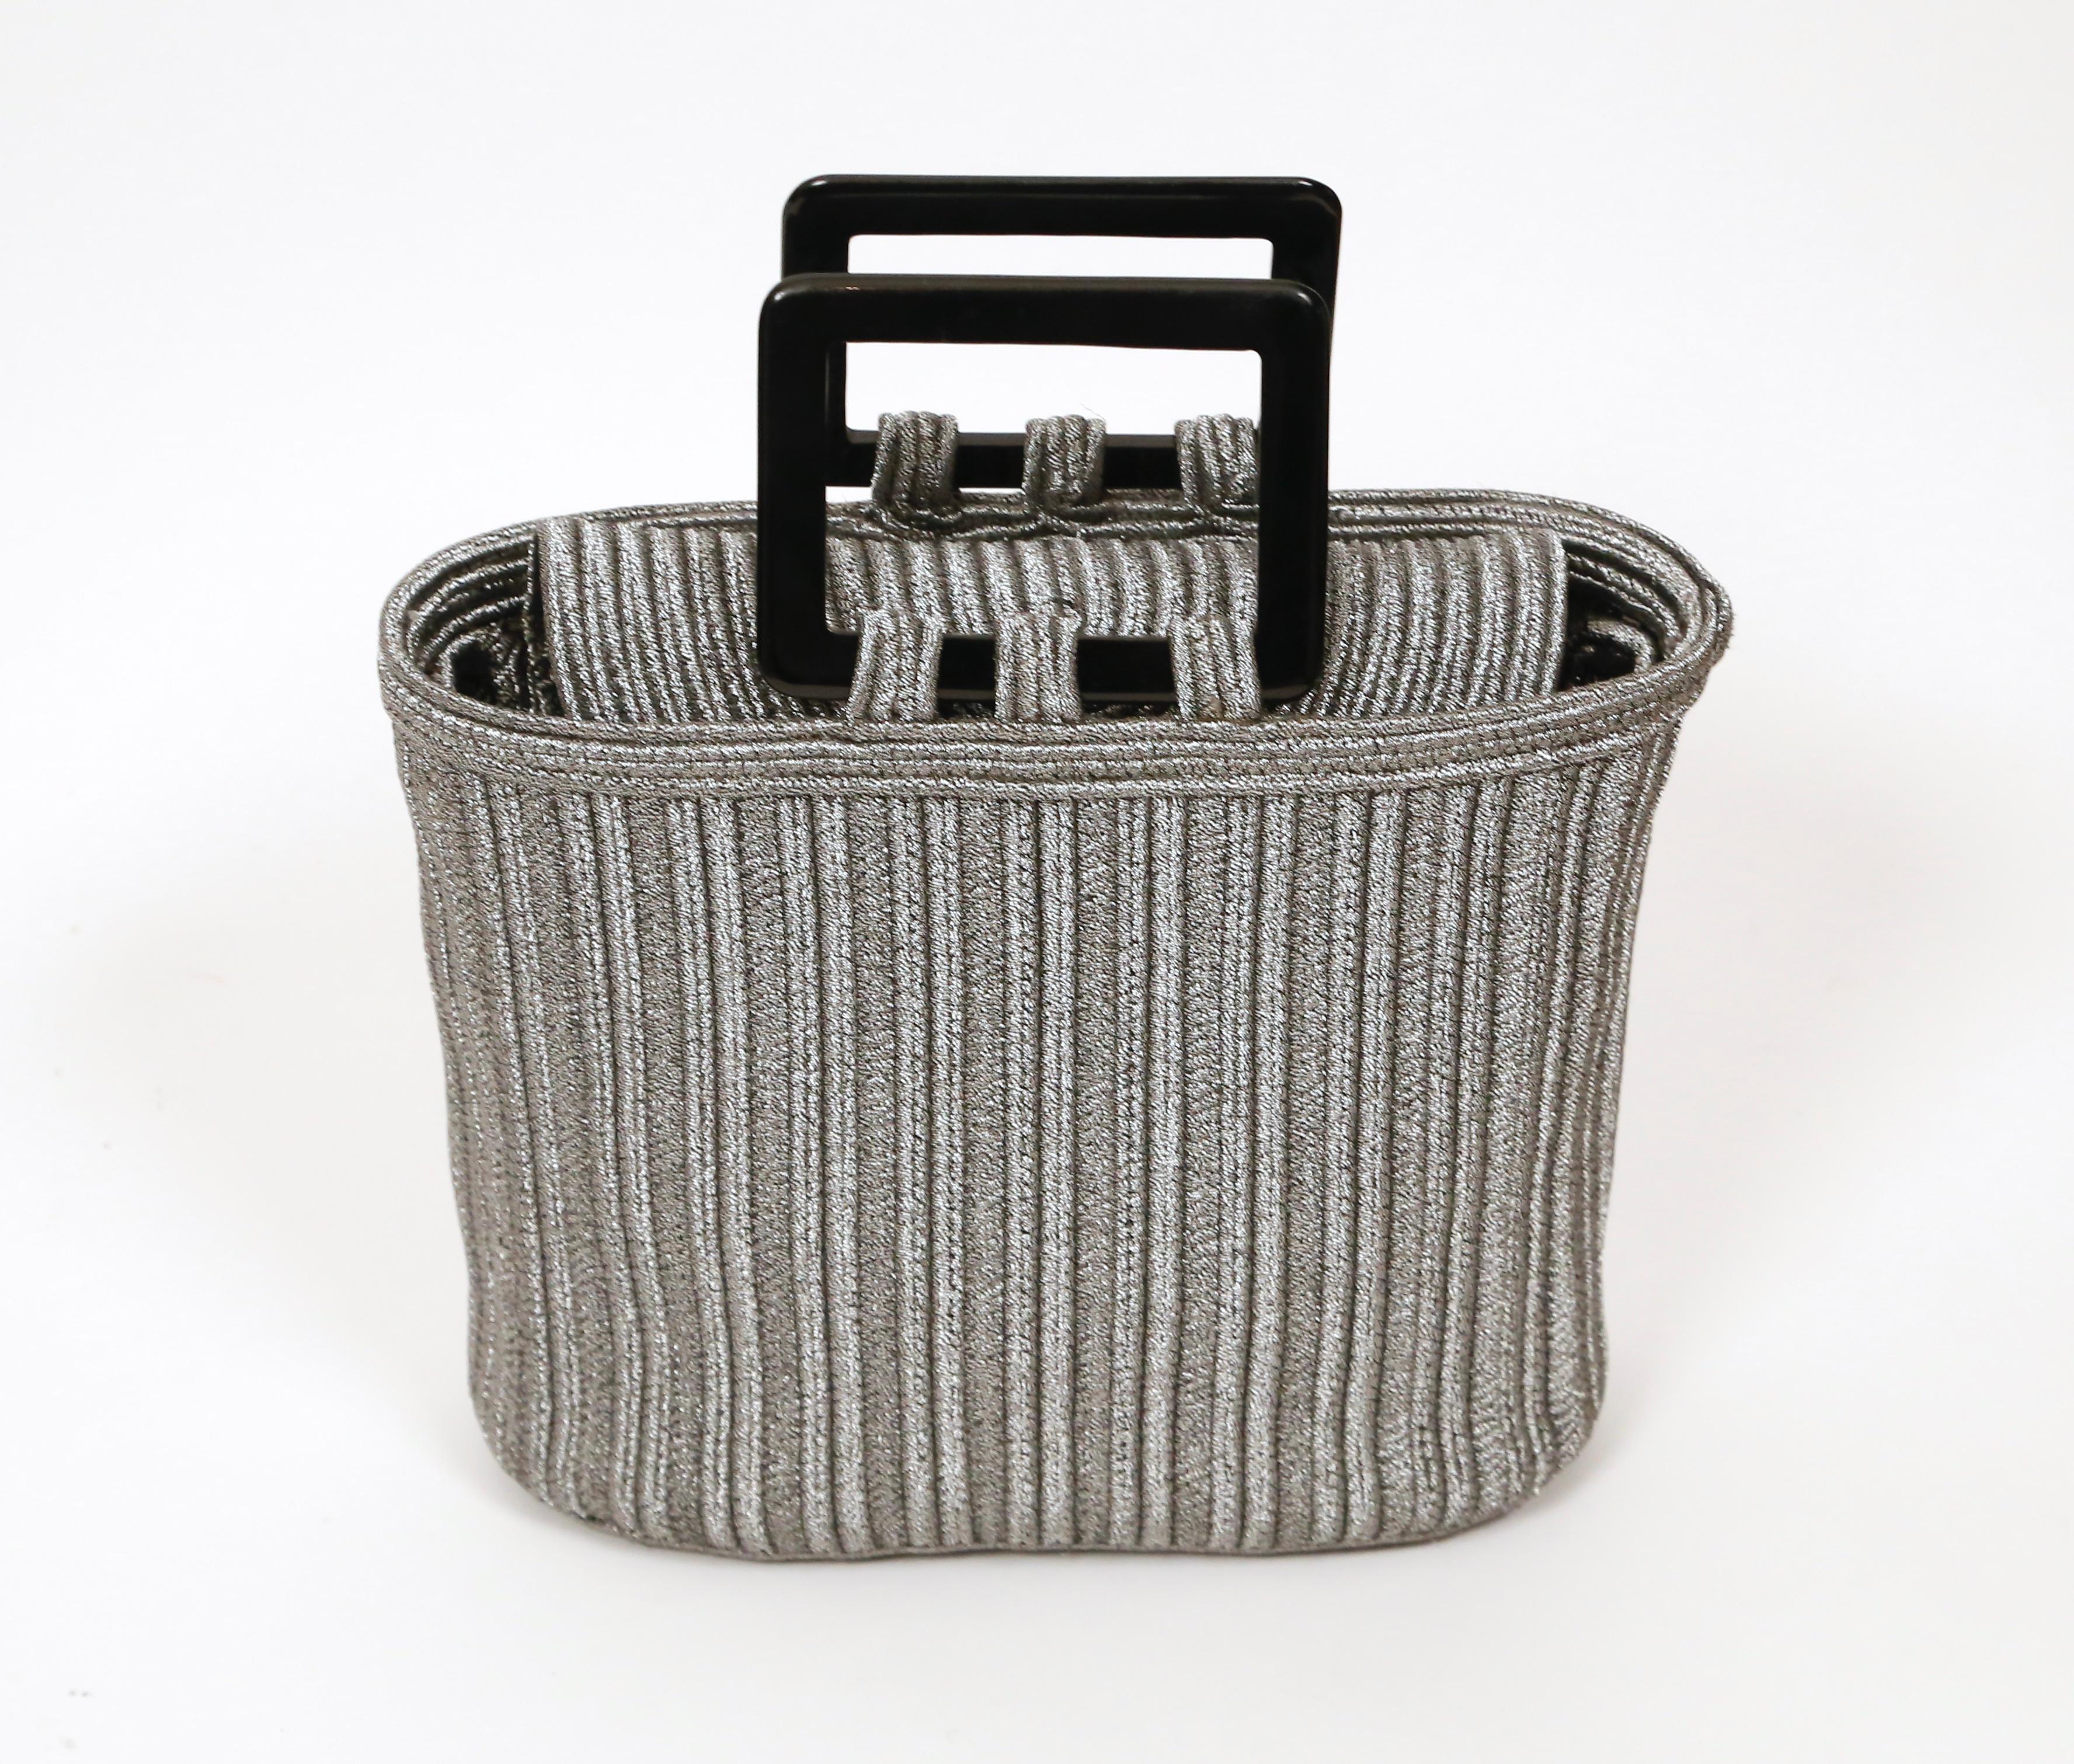 Amazing, deep silver-gray woven passementerie bag with black handle from Yves Saint Laurent rive gauche dating to the 1990's.  Approximate measurements: 9.5